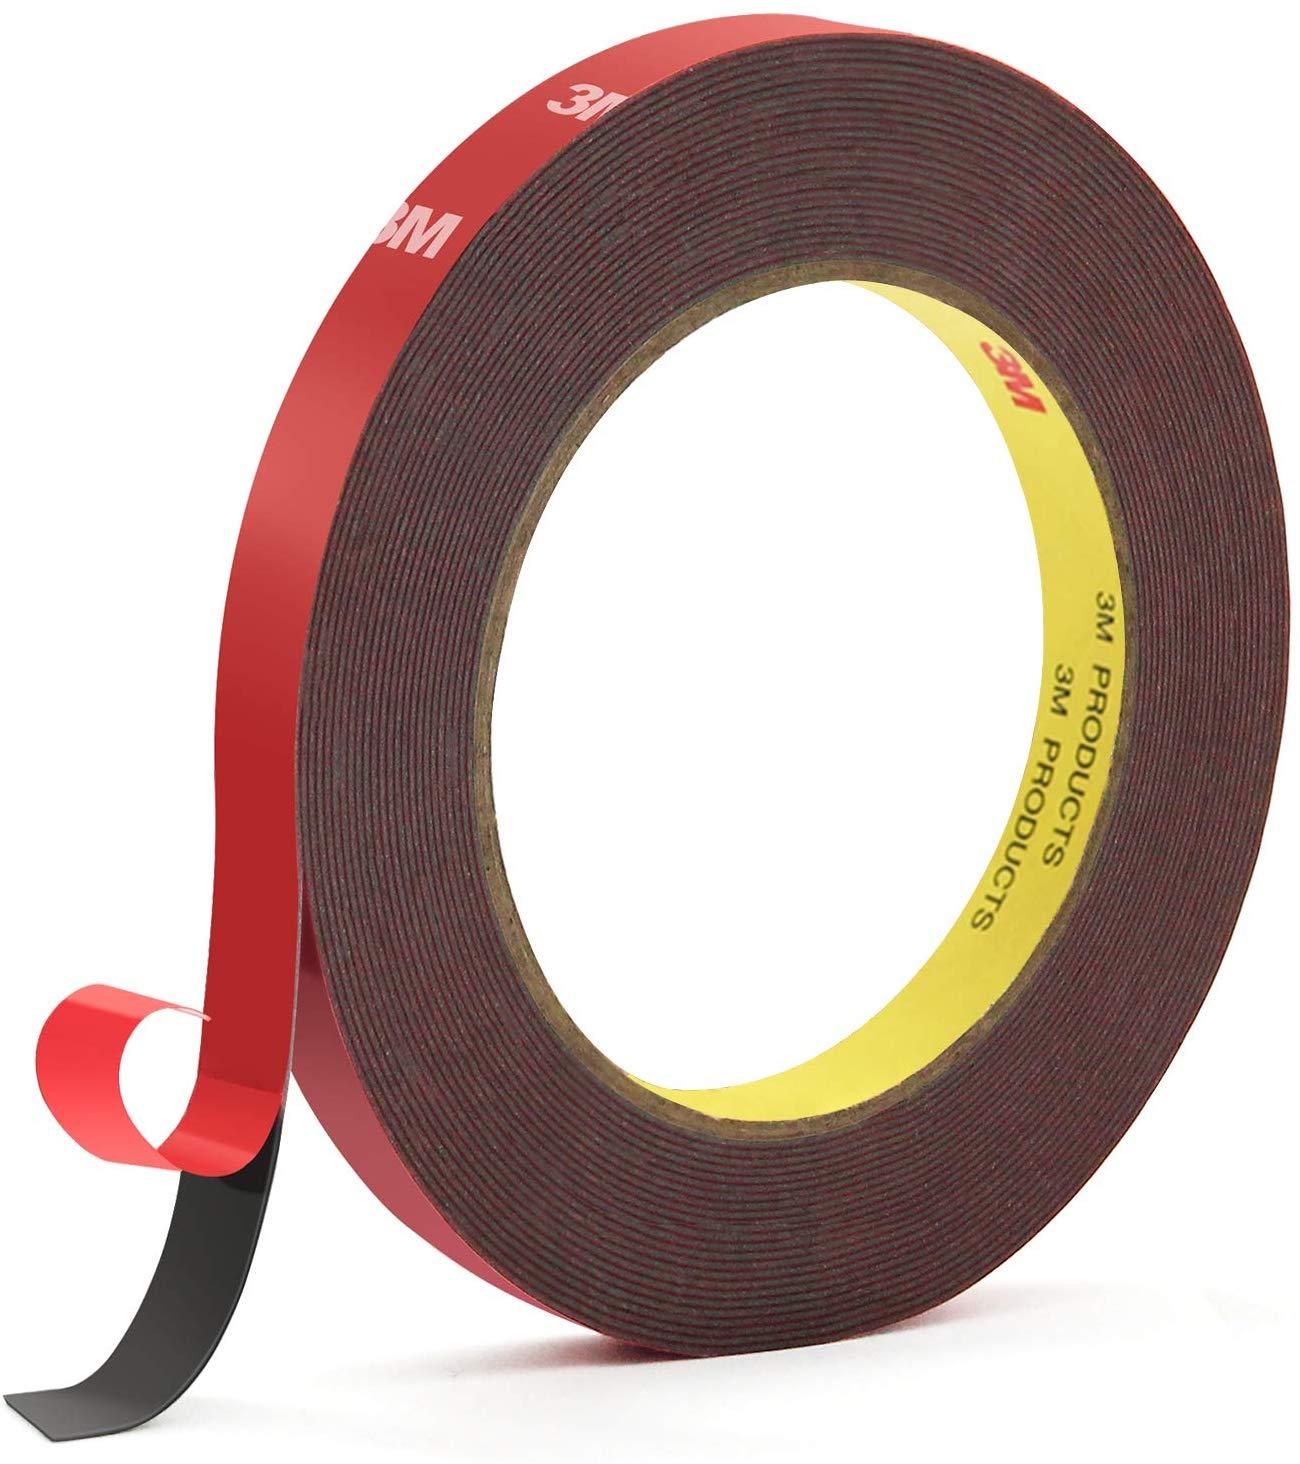 Length 3M Super Strong Double-Sided Tape Waterproof Outdoor Heavy-Duty Self- Adhesive Foam Tape for